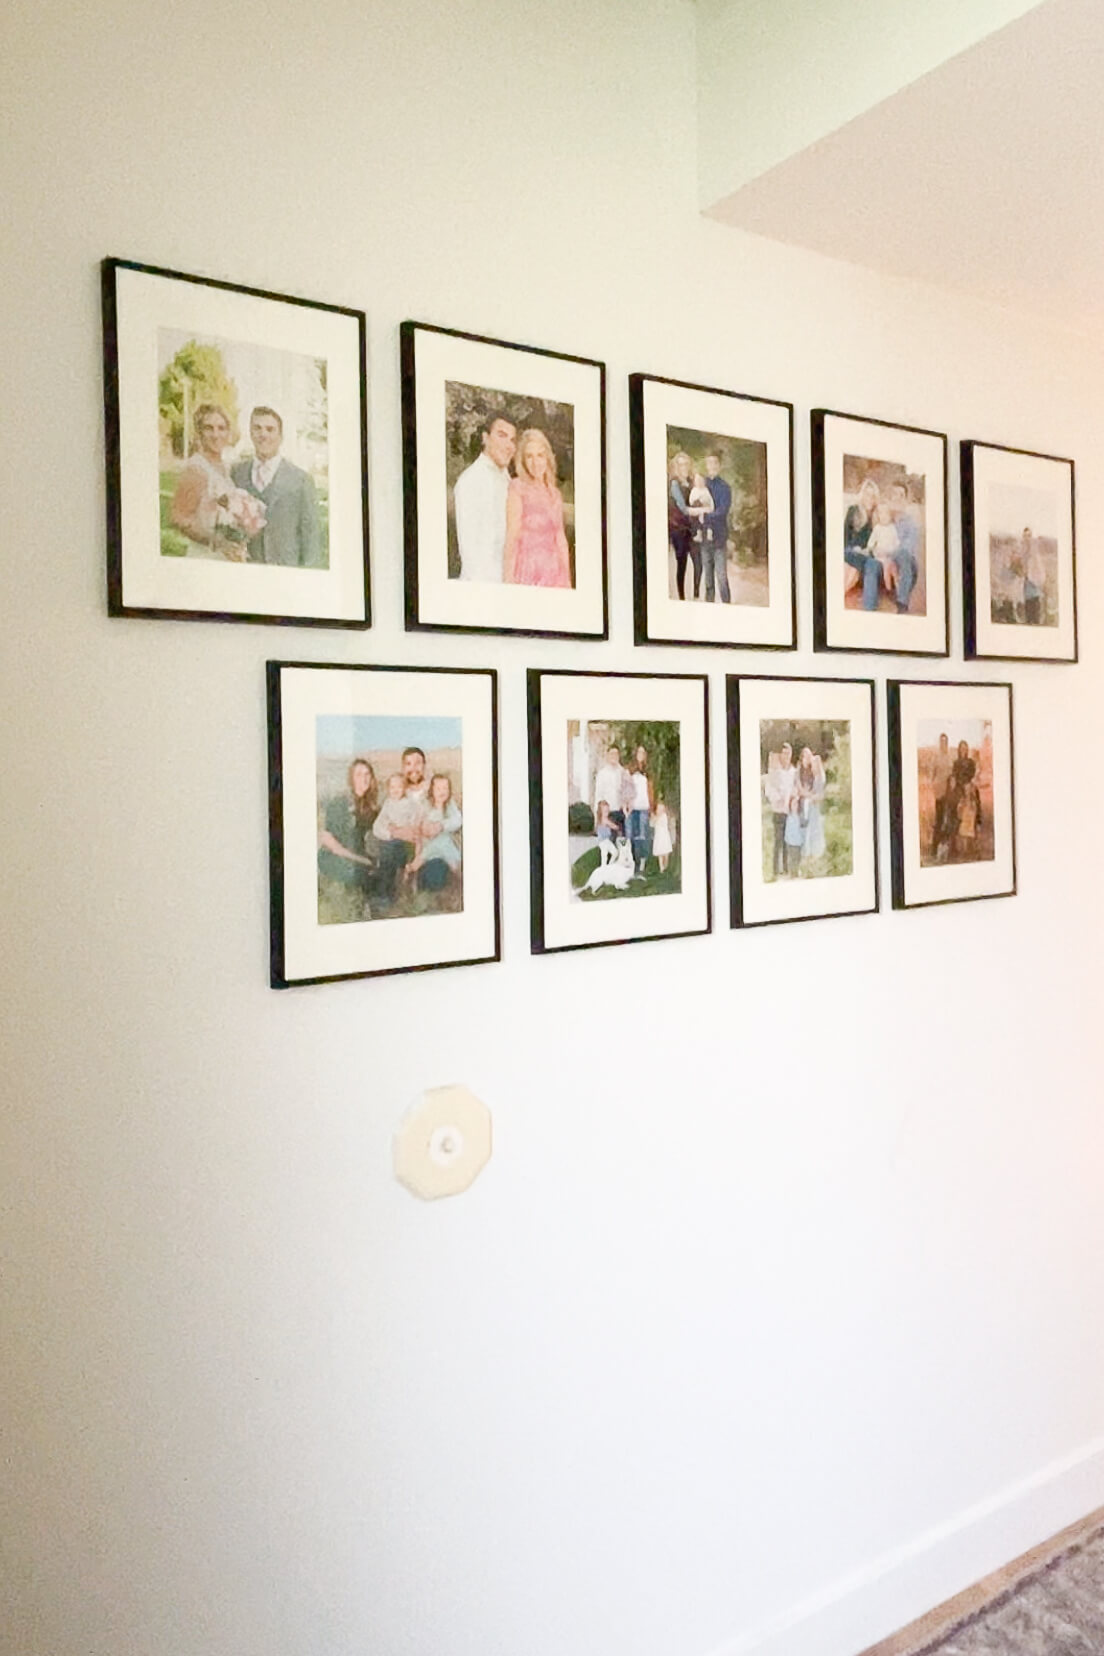 How to hang a gallery wall evenly.